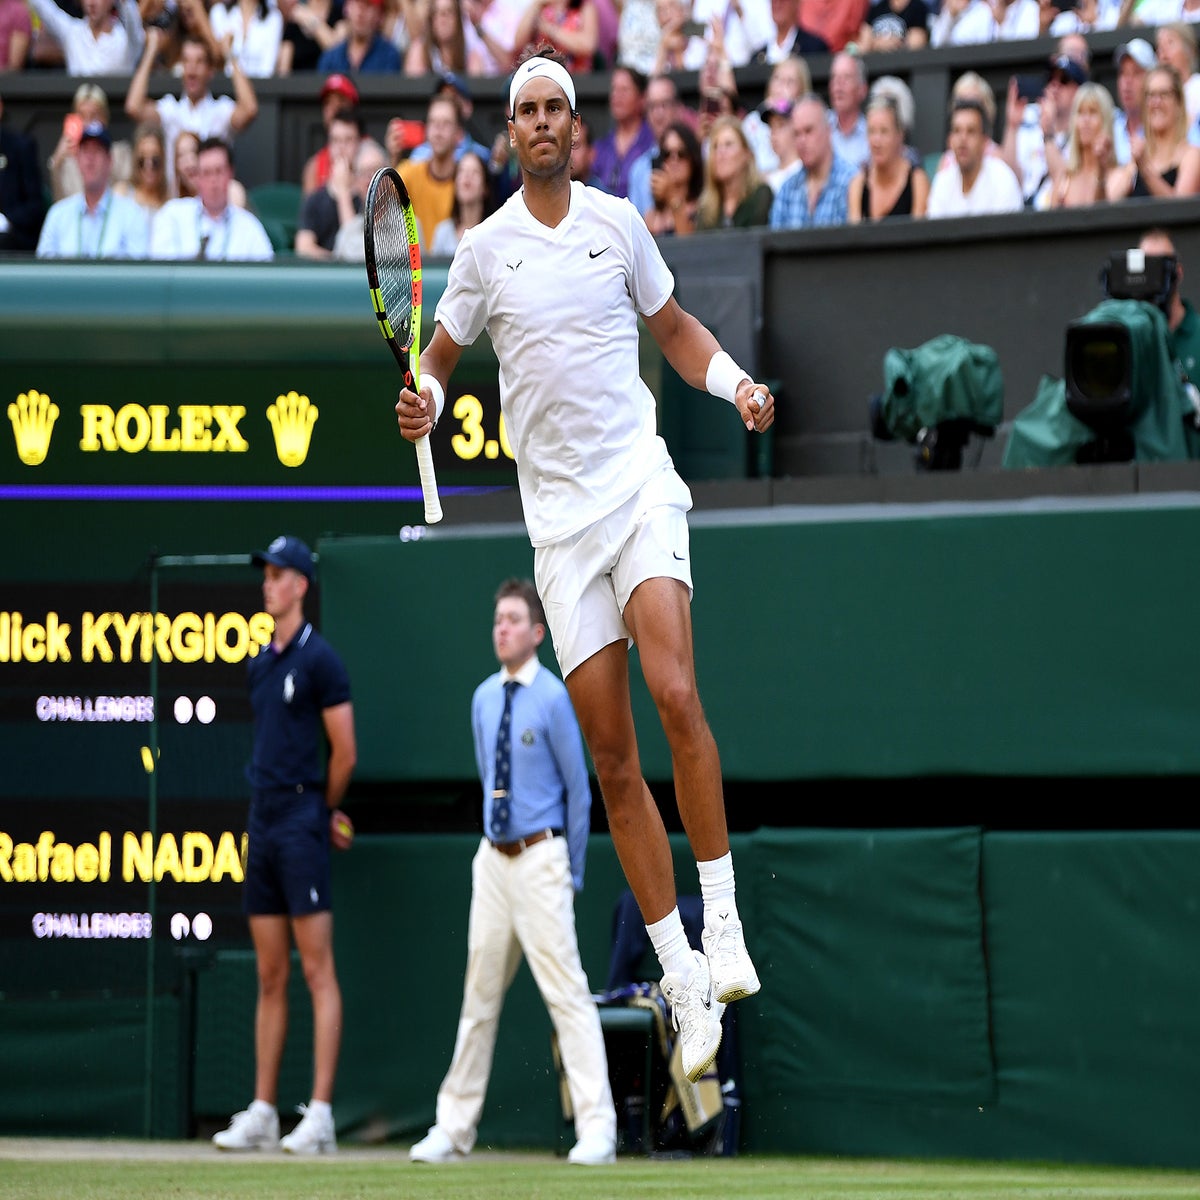 Wimbledon 2019: Rafael Nadal gets the better of bitter rival Kyrgios | The Independent | The Independent